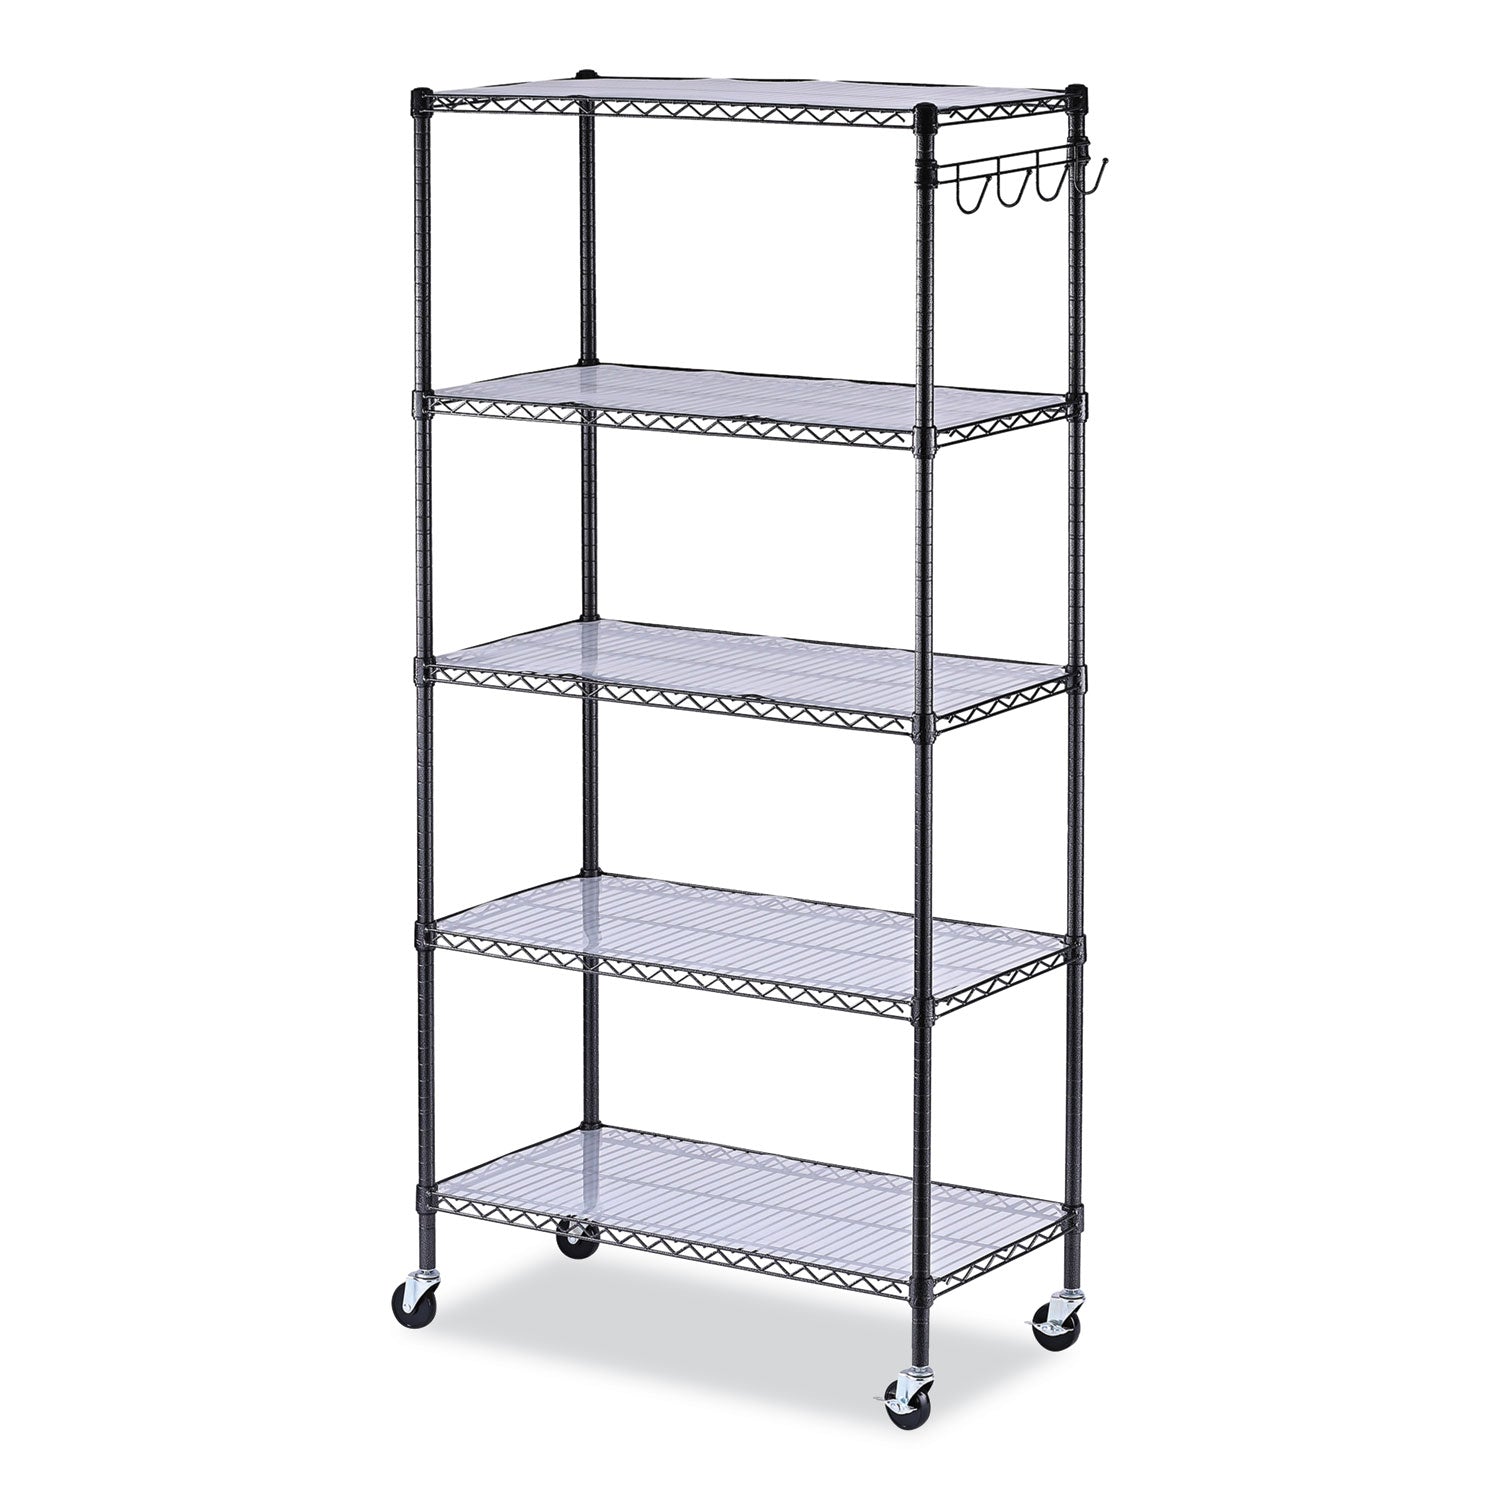 5-shelf-wire-shelving-kit-with-casters-and-shelf-liners-36w-x-18d-x-72h-black-anthracite_alesw653618ba - 1